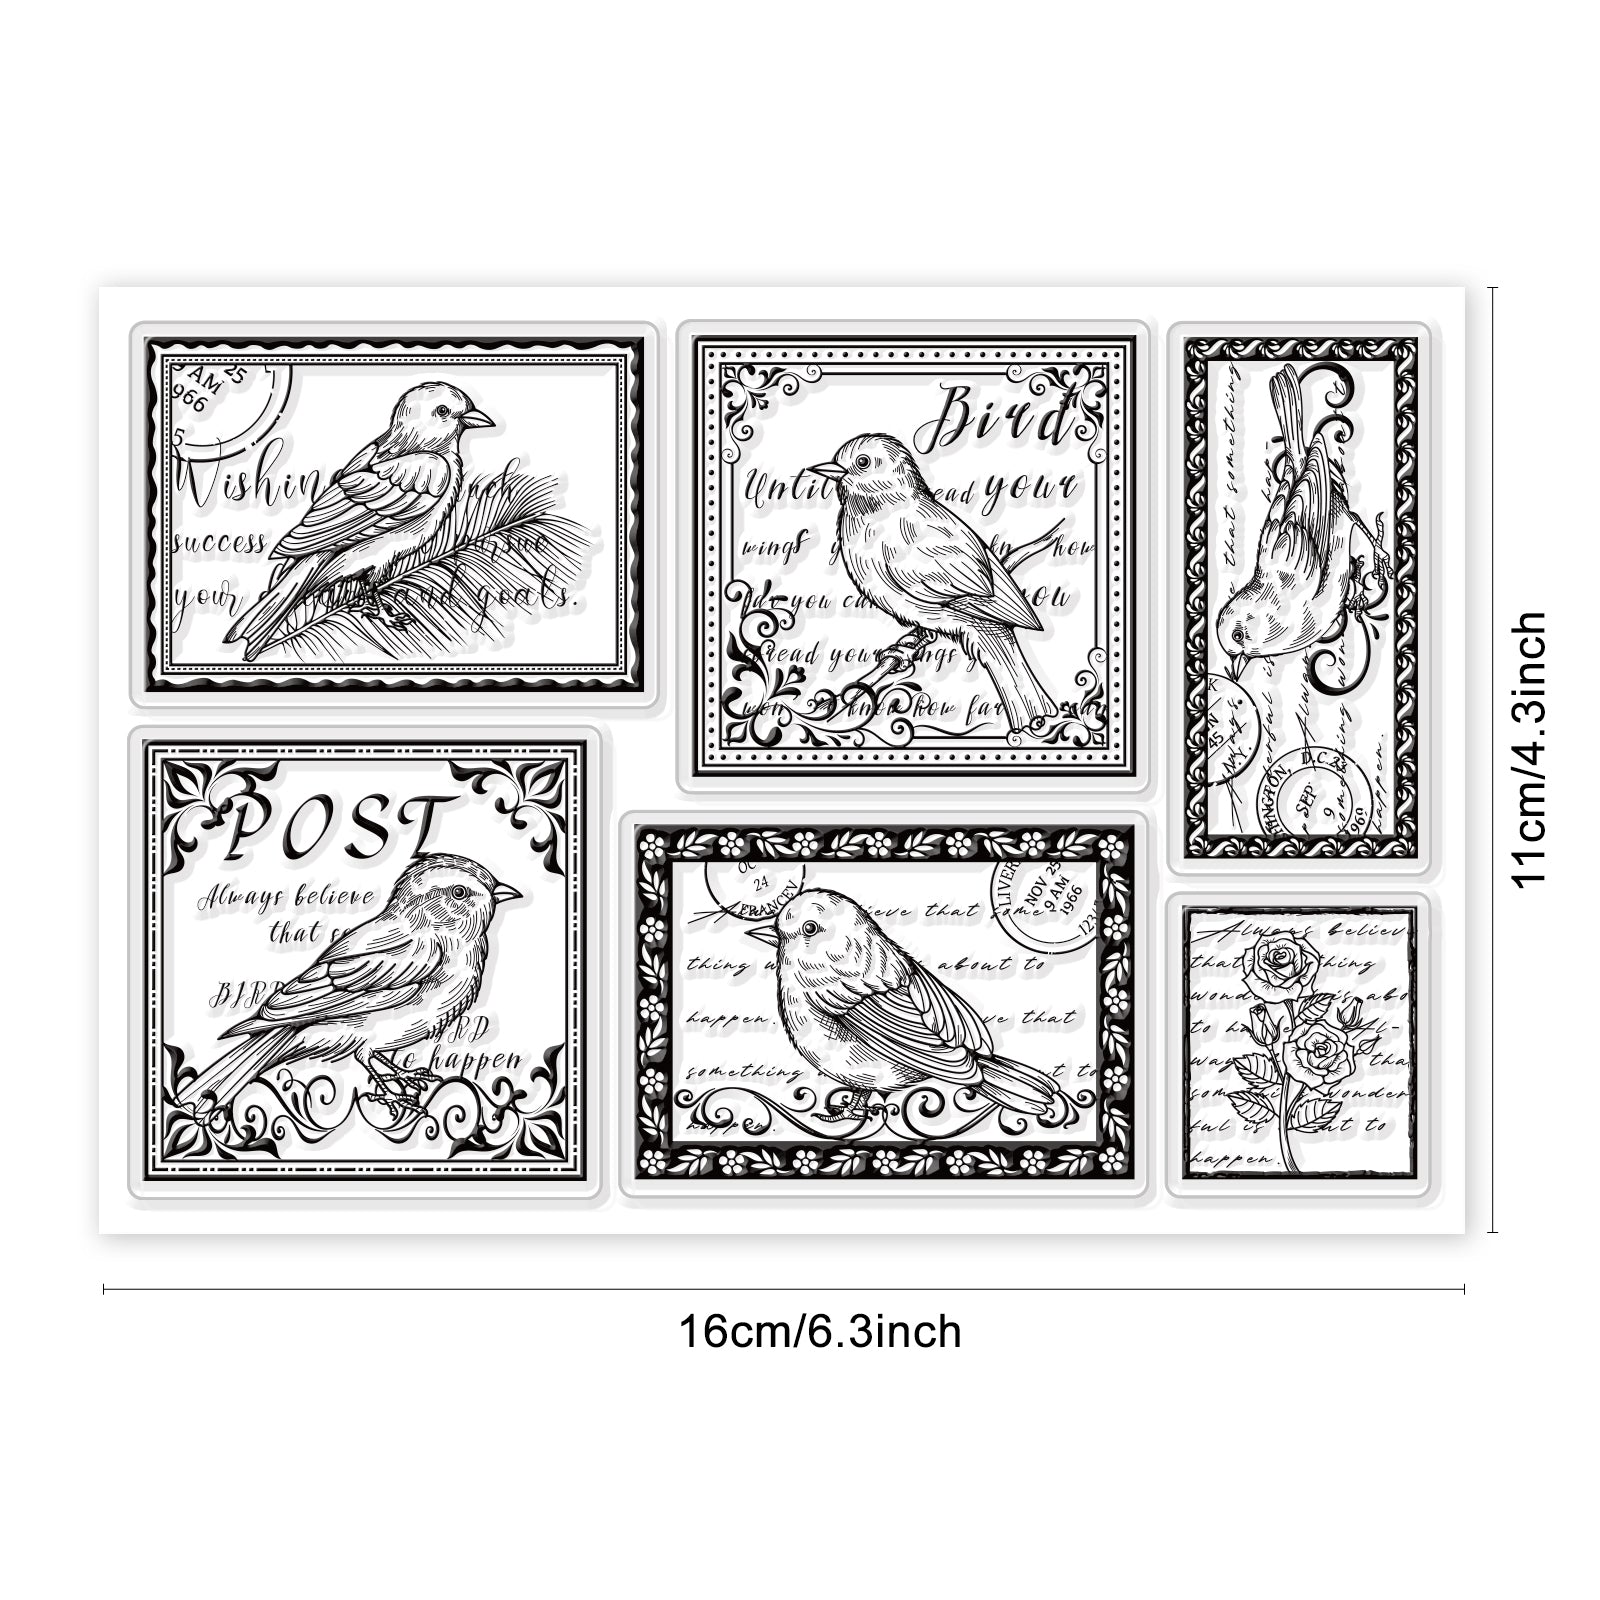 Globleland Vintage, Bird Stamp, Realistic Birds, Flower, Cute Bird, Birds Pattern Clear Silicone Stamp Seal for Card Making Decoration and DIY Scrapbooking